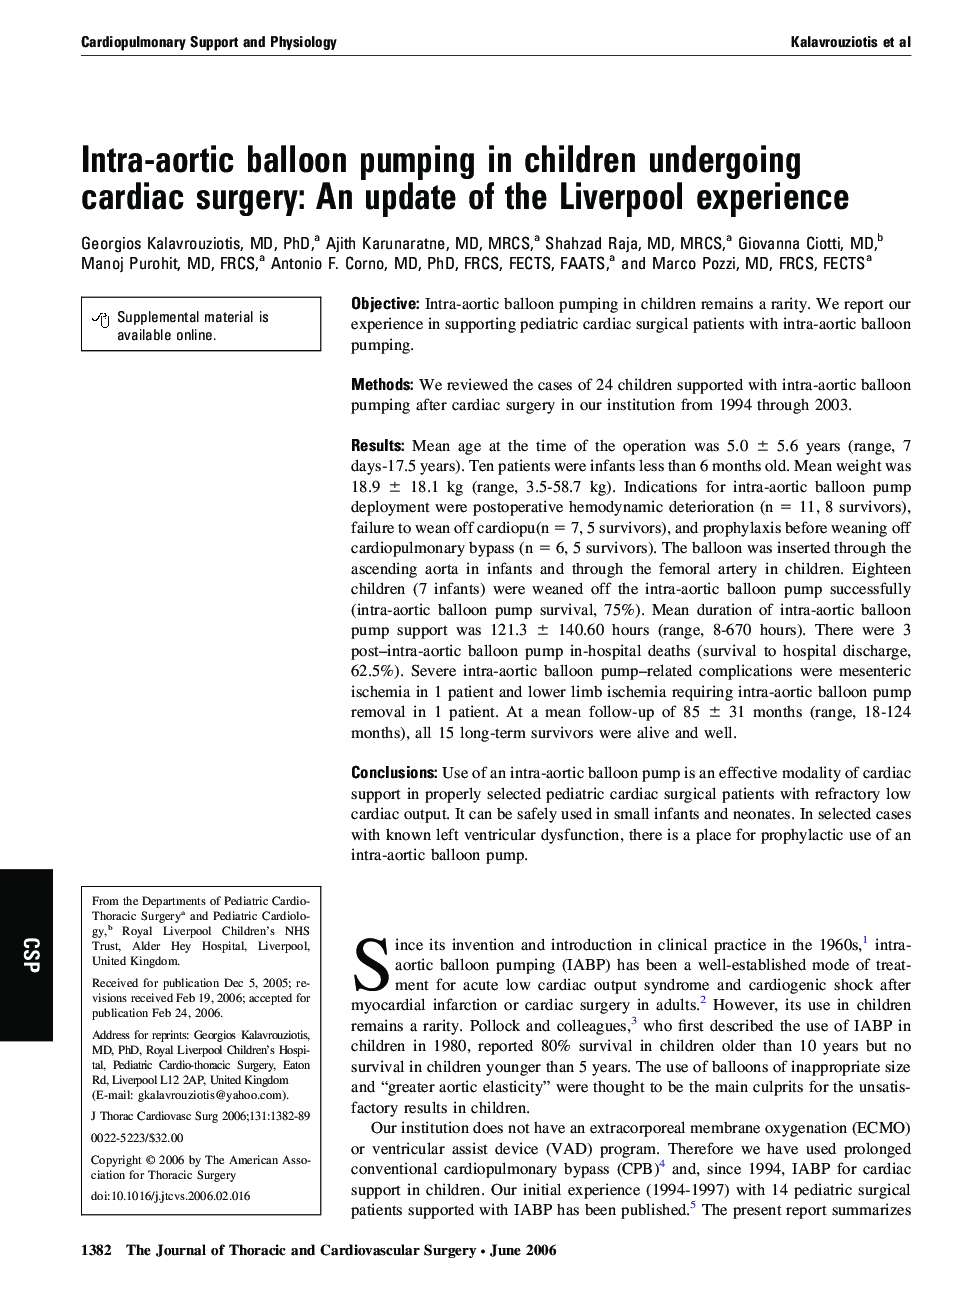 Intra-aortic balloon pumping in children undergoing cardiac surgery: An update of the Liverpool experience